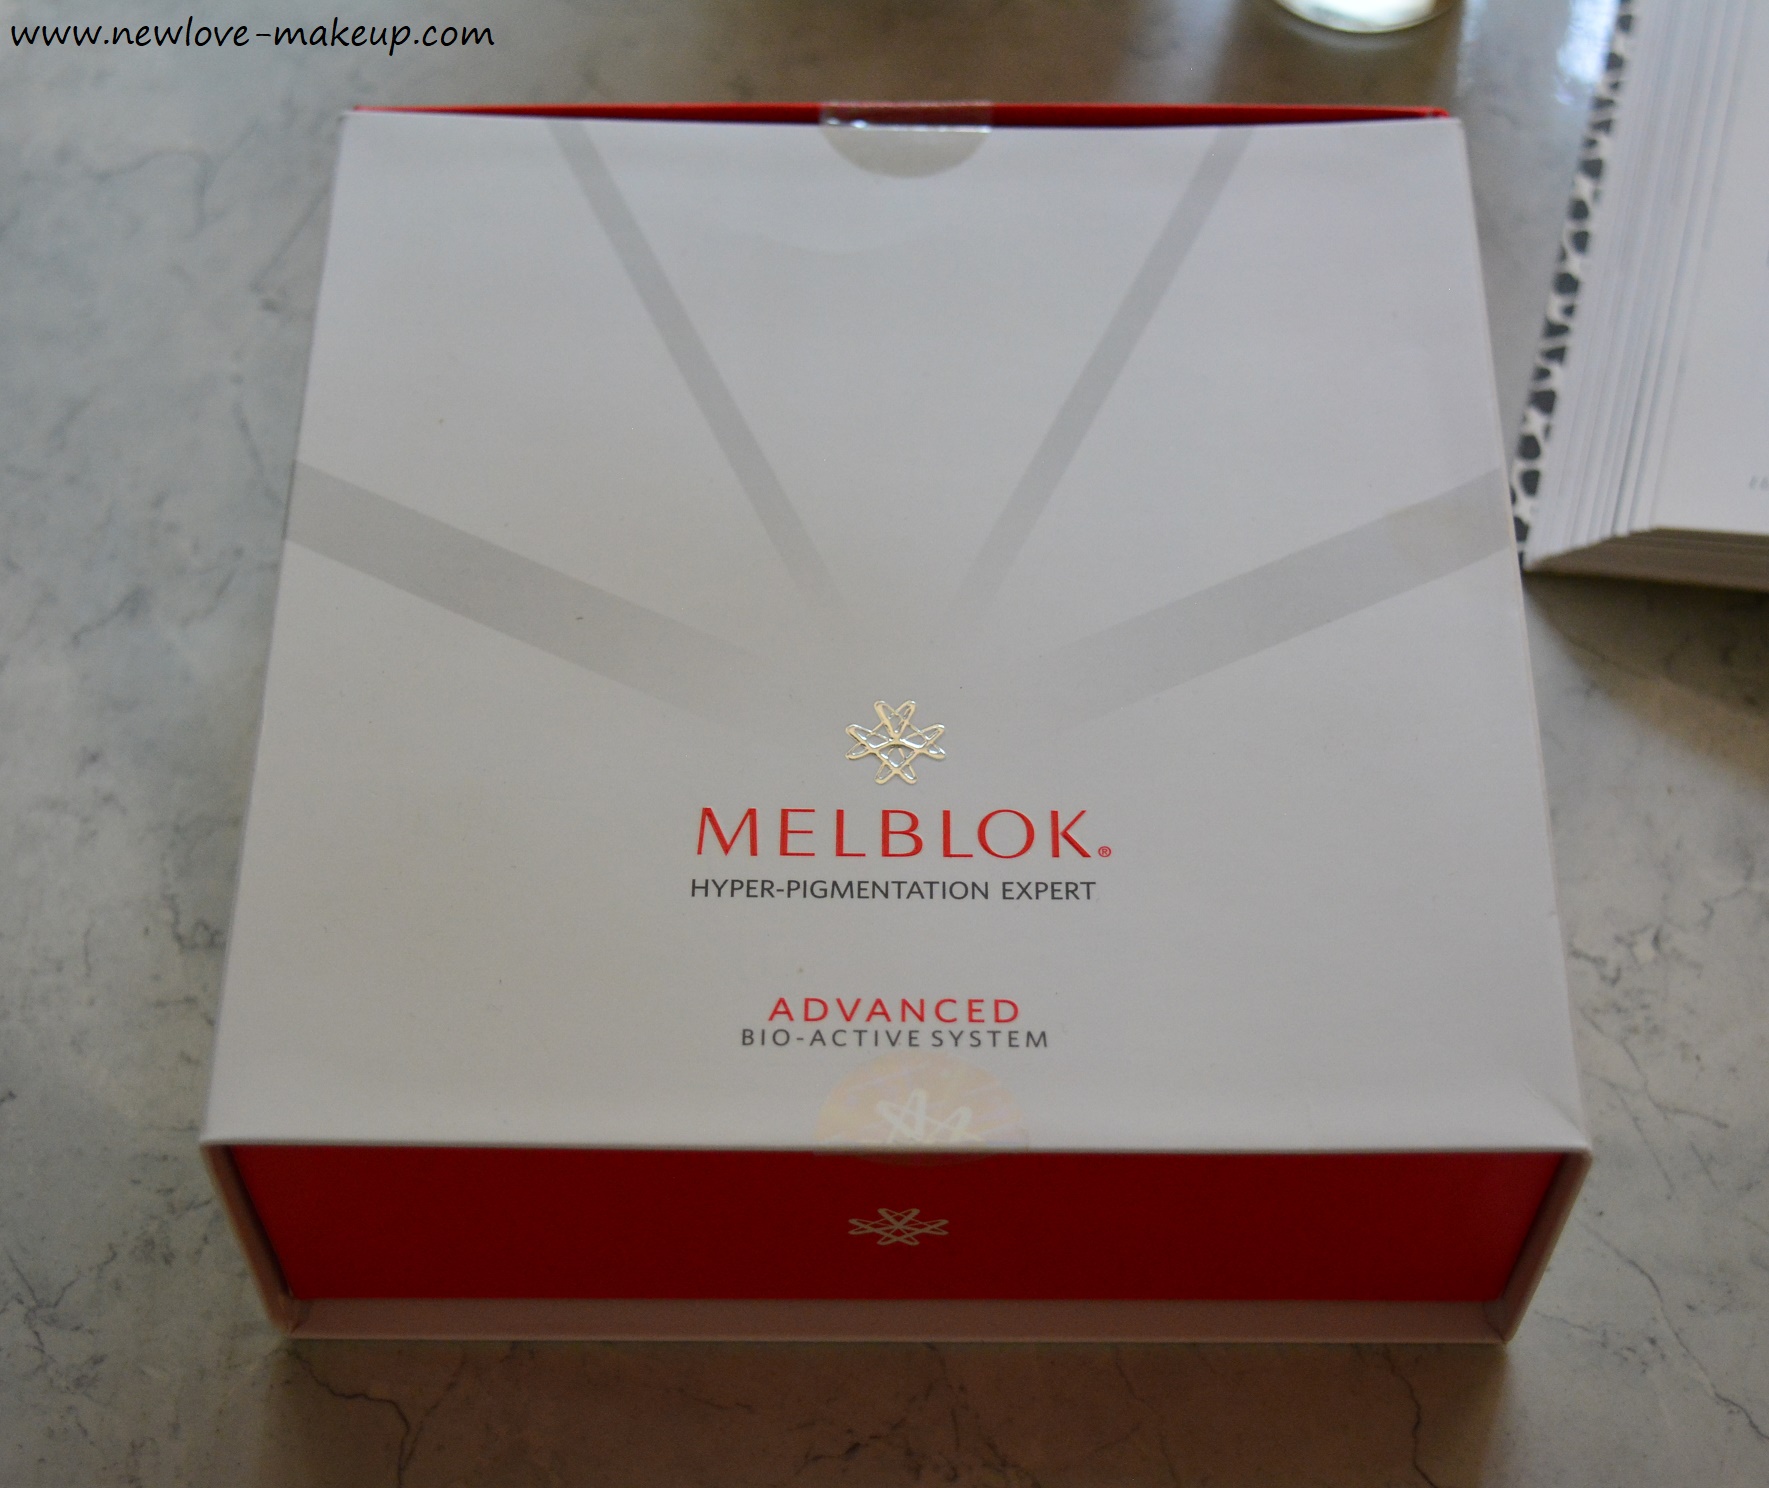 Best Skin Care for Hyper Pigmentation in India? Melblok Advanced Home Kit ReviewBest Skin Care for Hyper Pigmentation in India? Melblok Advanced Home Kit Review